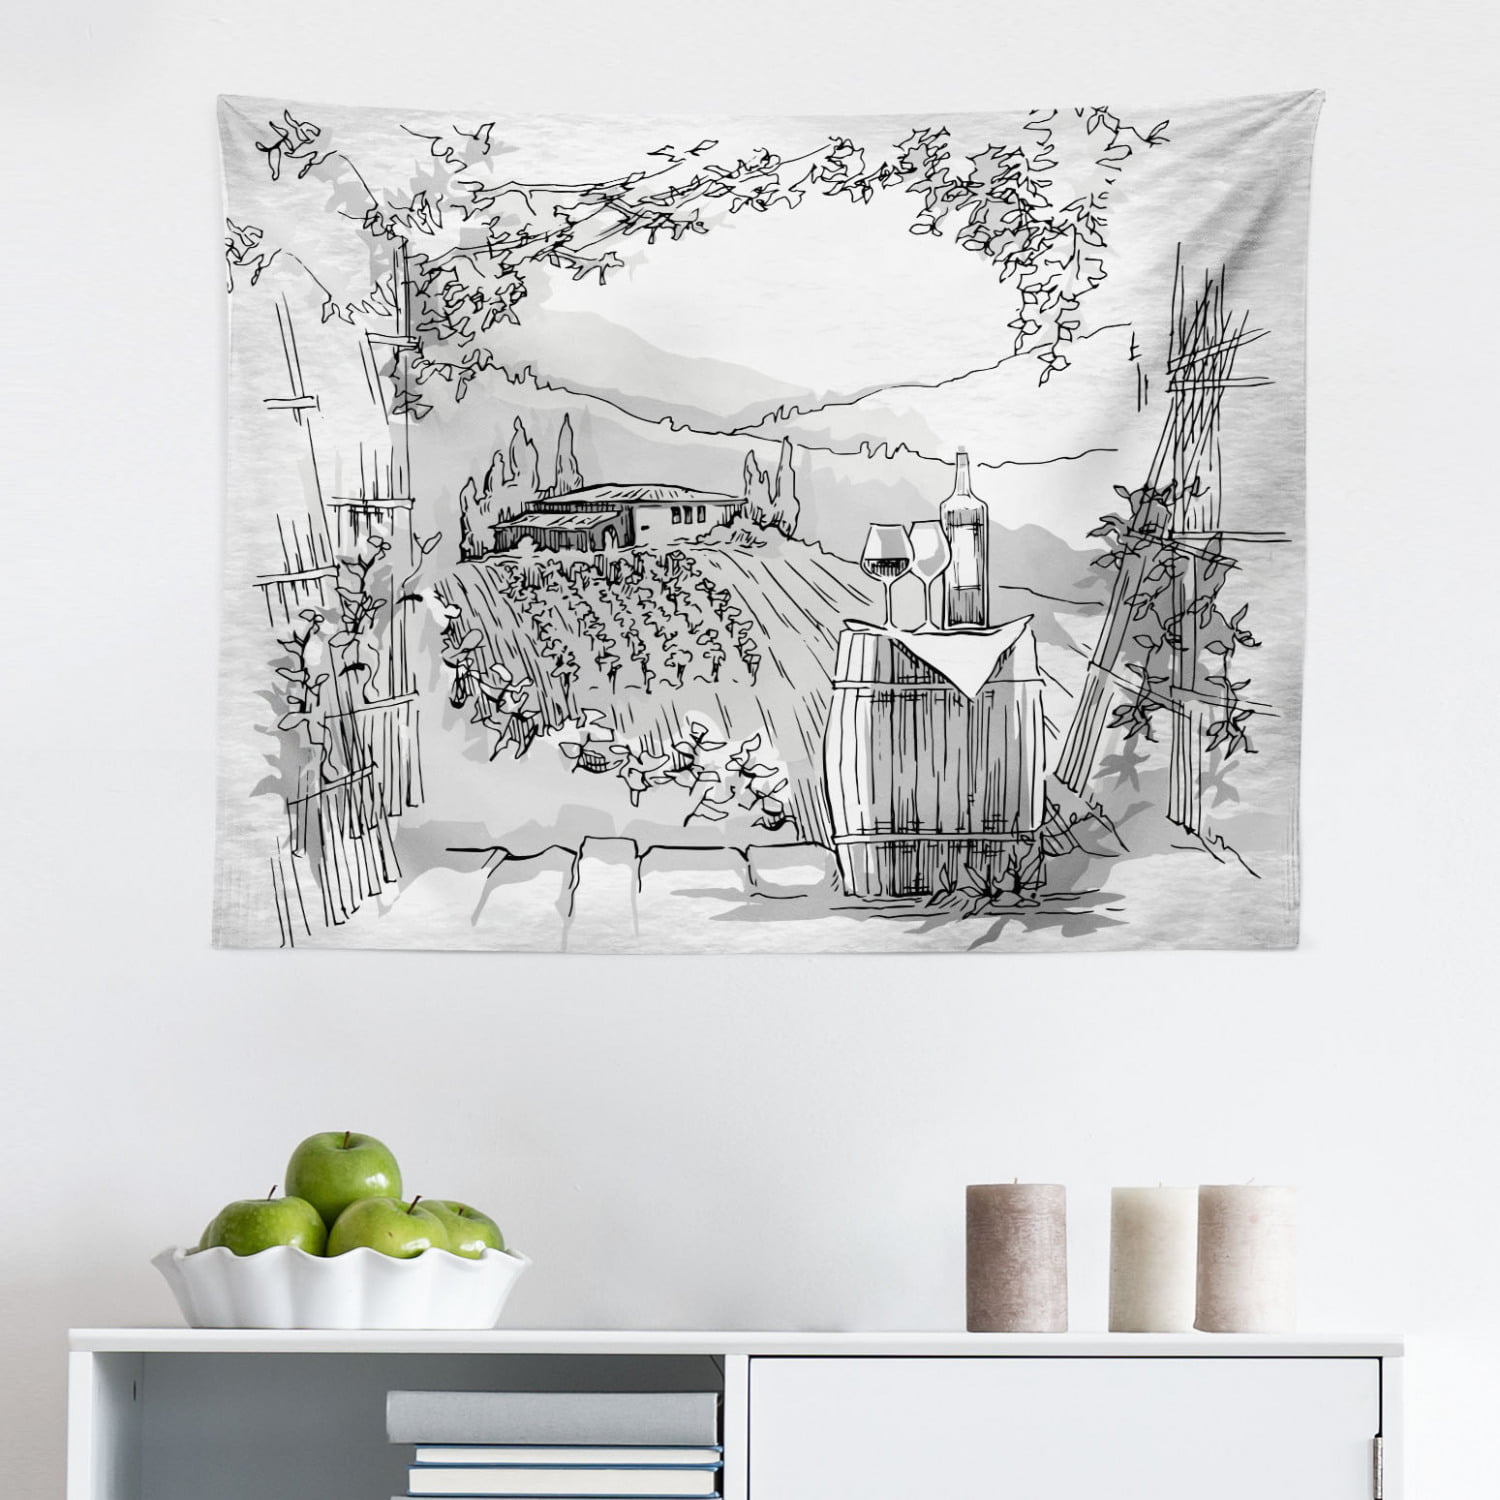 Landscape Bedroom Dorm Decor Artwork Cartoon Tapestry Tapestry of the Countryside Art Nouveau Wall Tapestry The Forest Wall Hanging